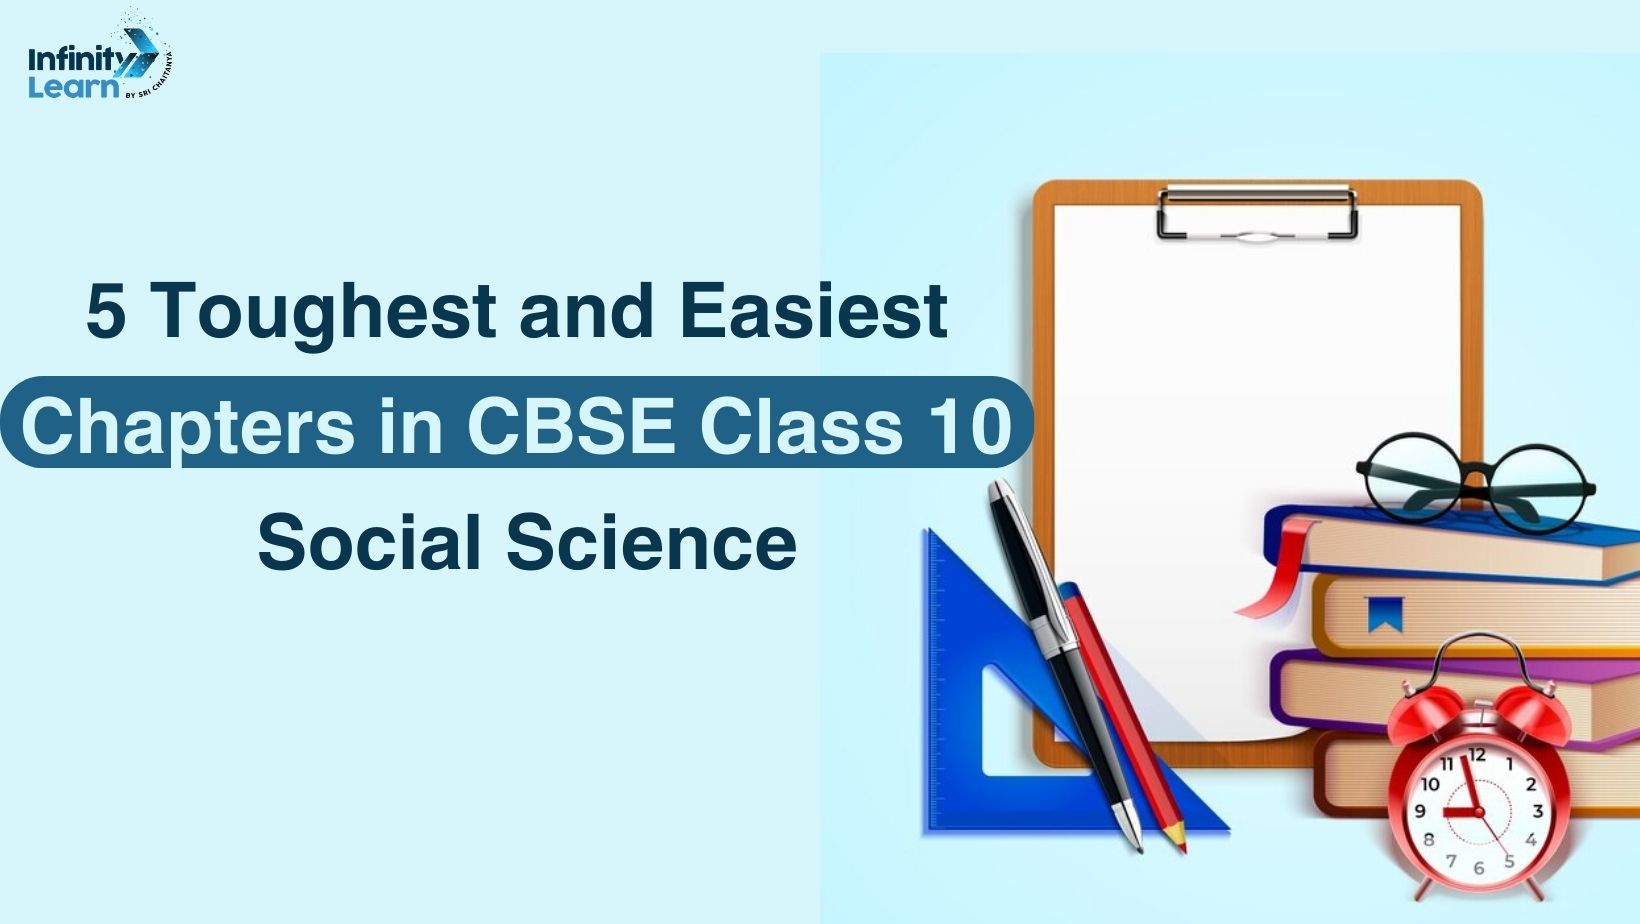 5 Toughest Chapters in CBSE Class 10 Social Science